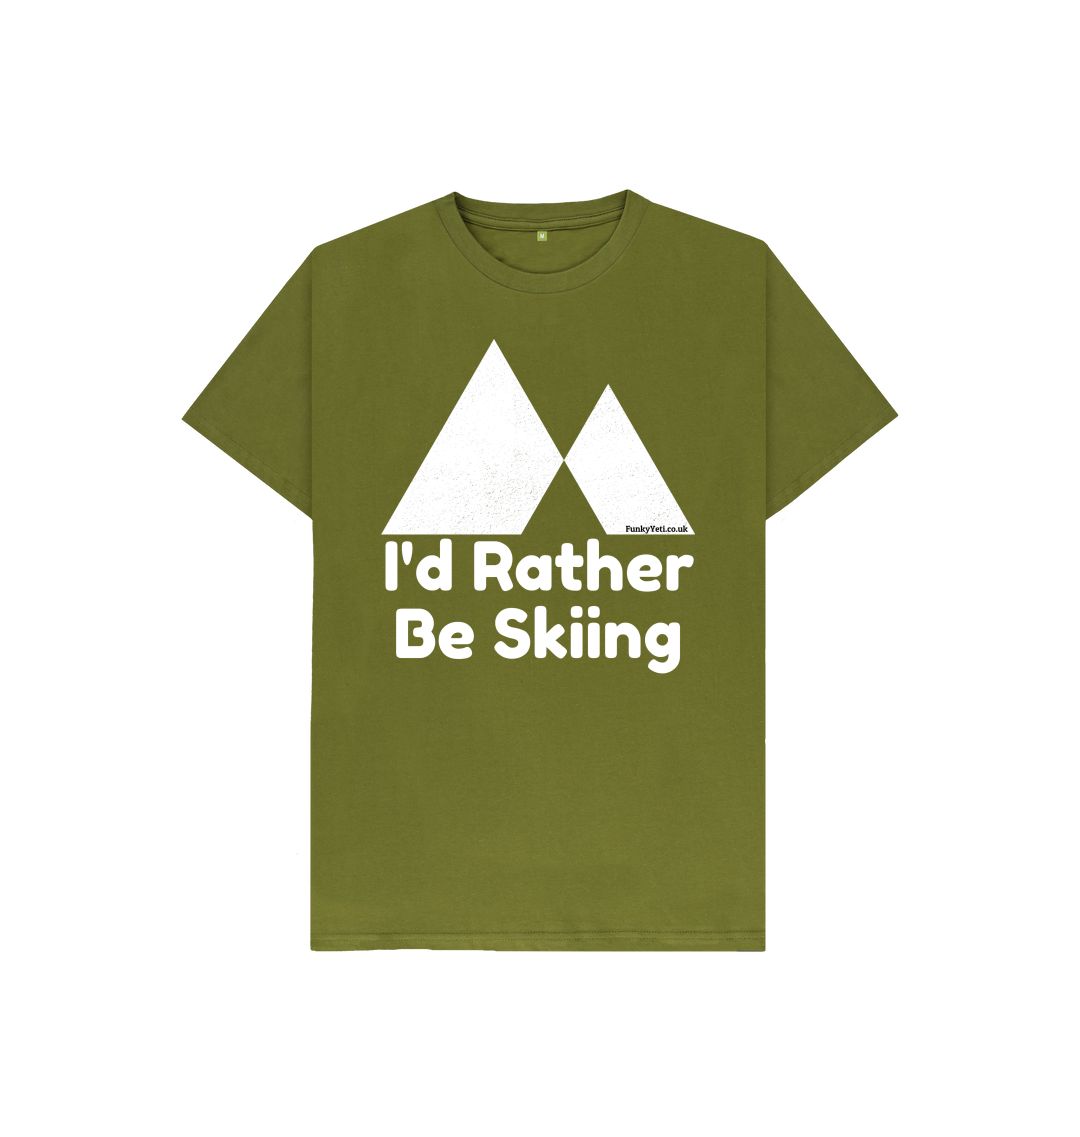 Moss Green Funky Yeti Kids Tee - I'd Rather Be Skiing